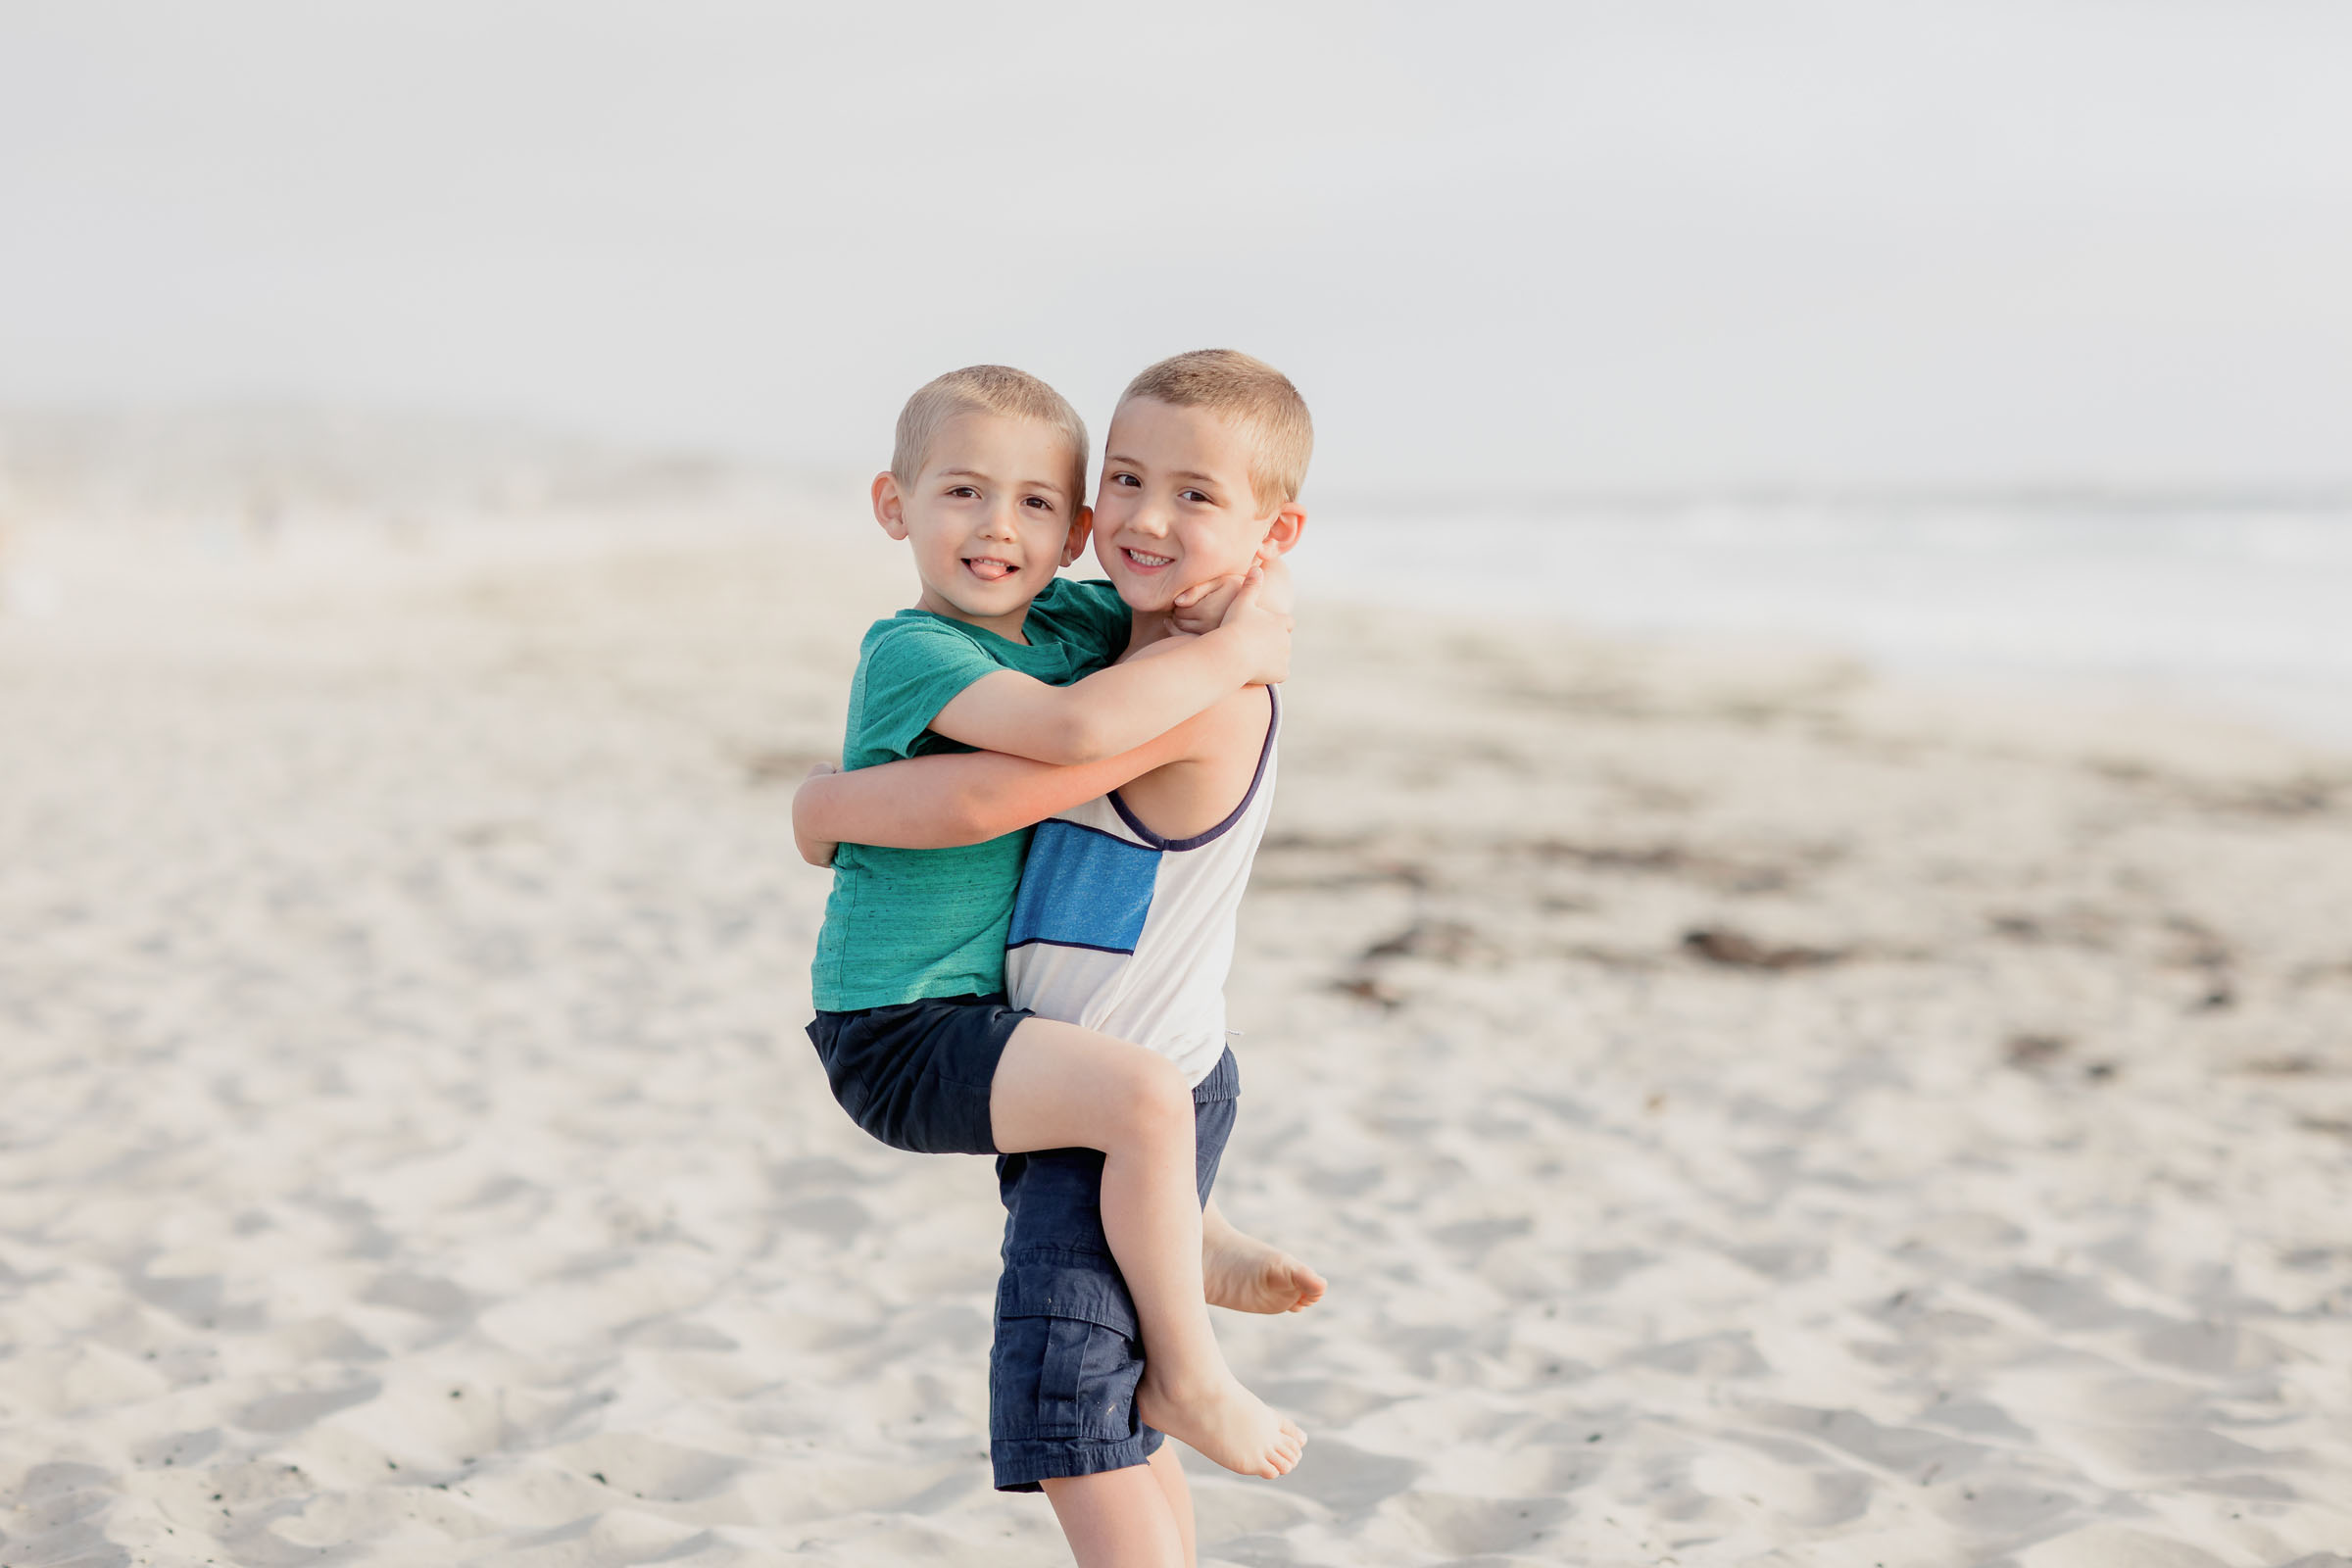 Cute image of two brothers hugging each other on the beach in La Jolla